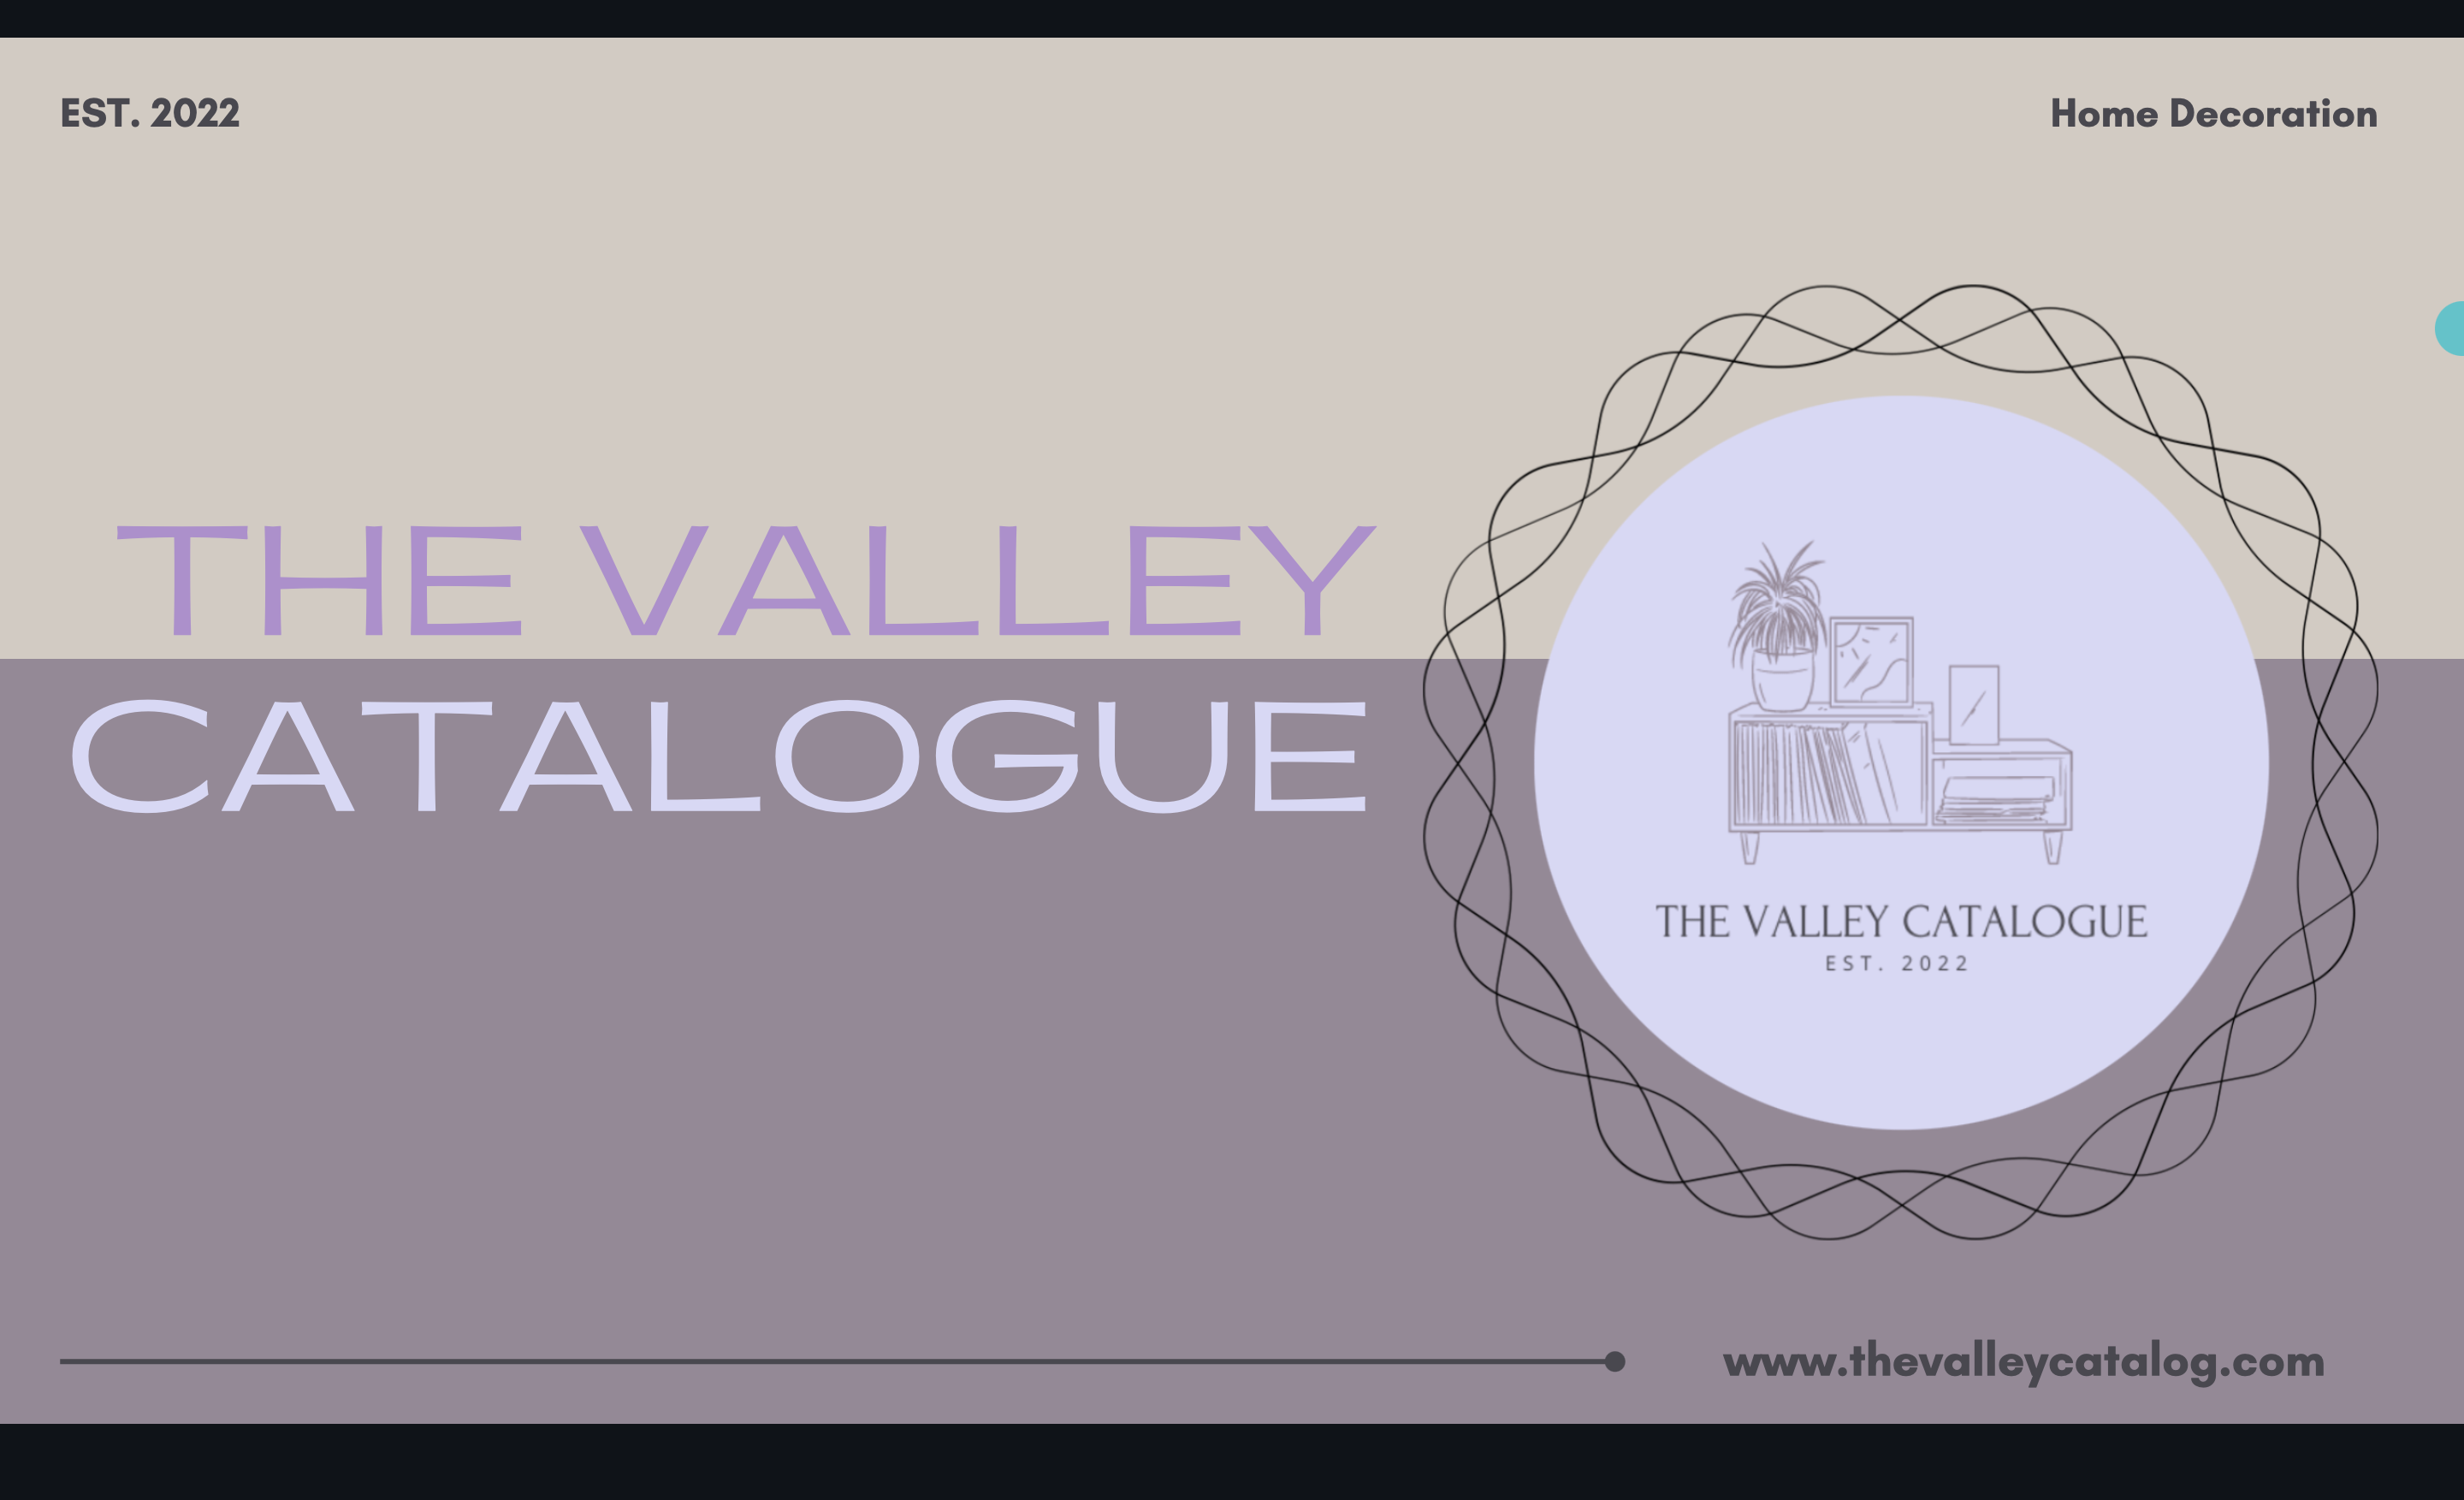 The Valley Catalogue